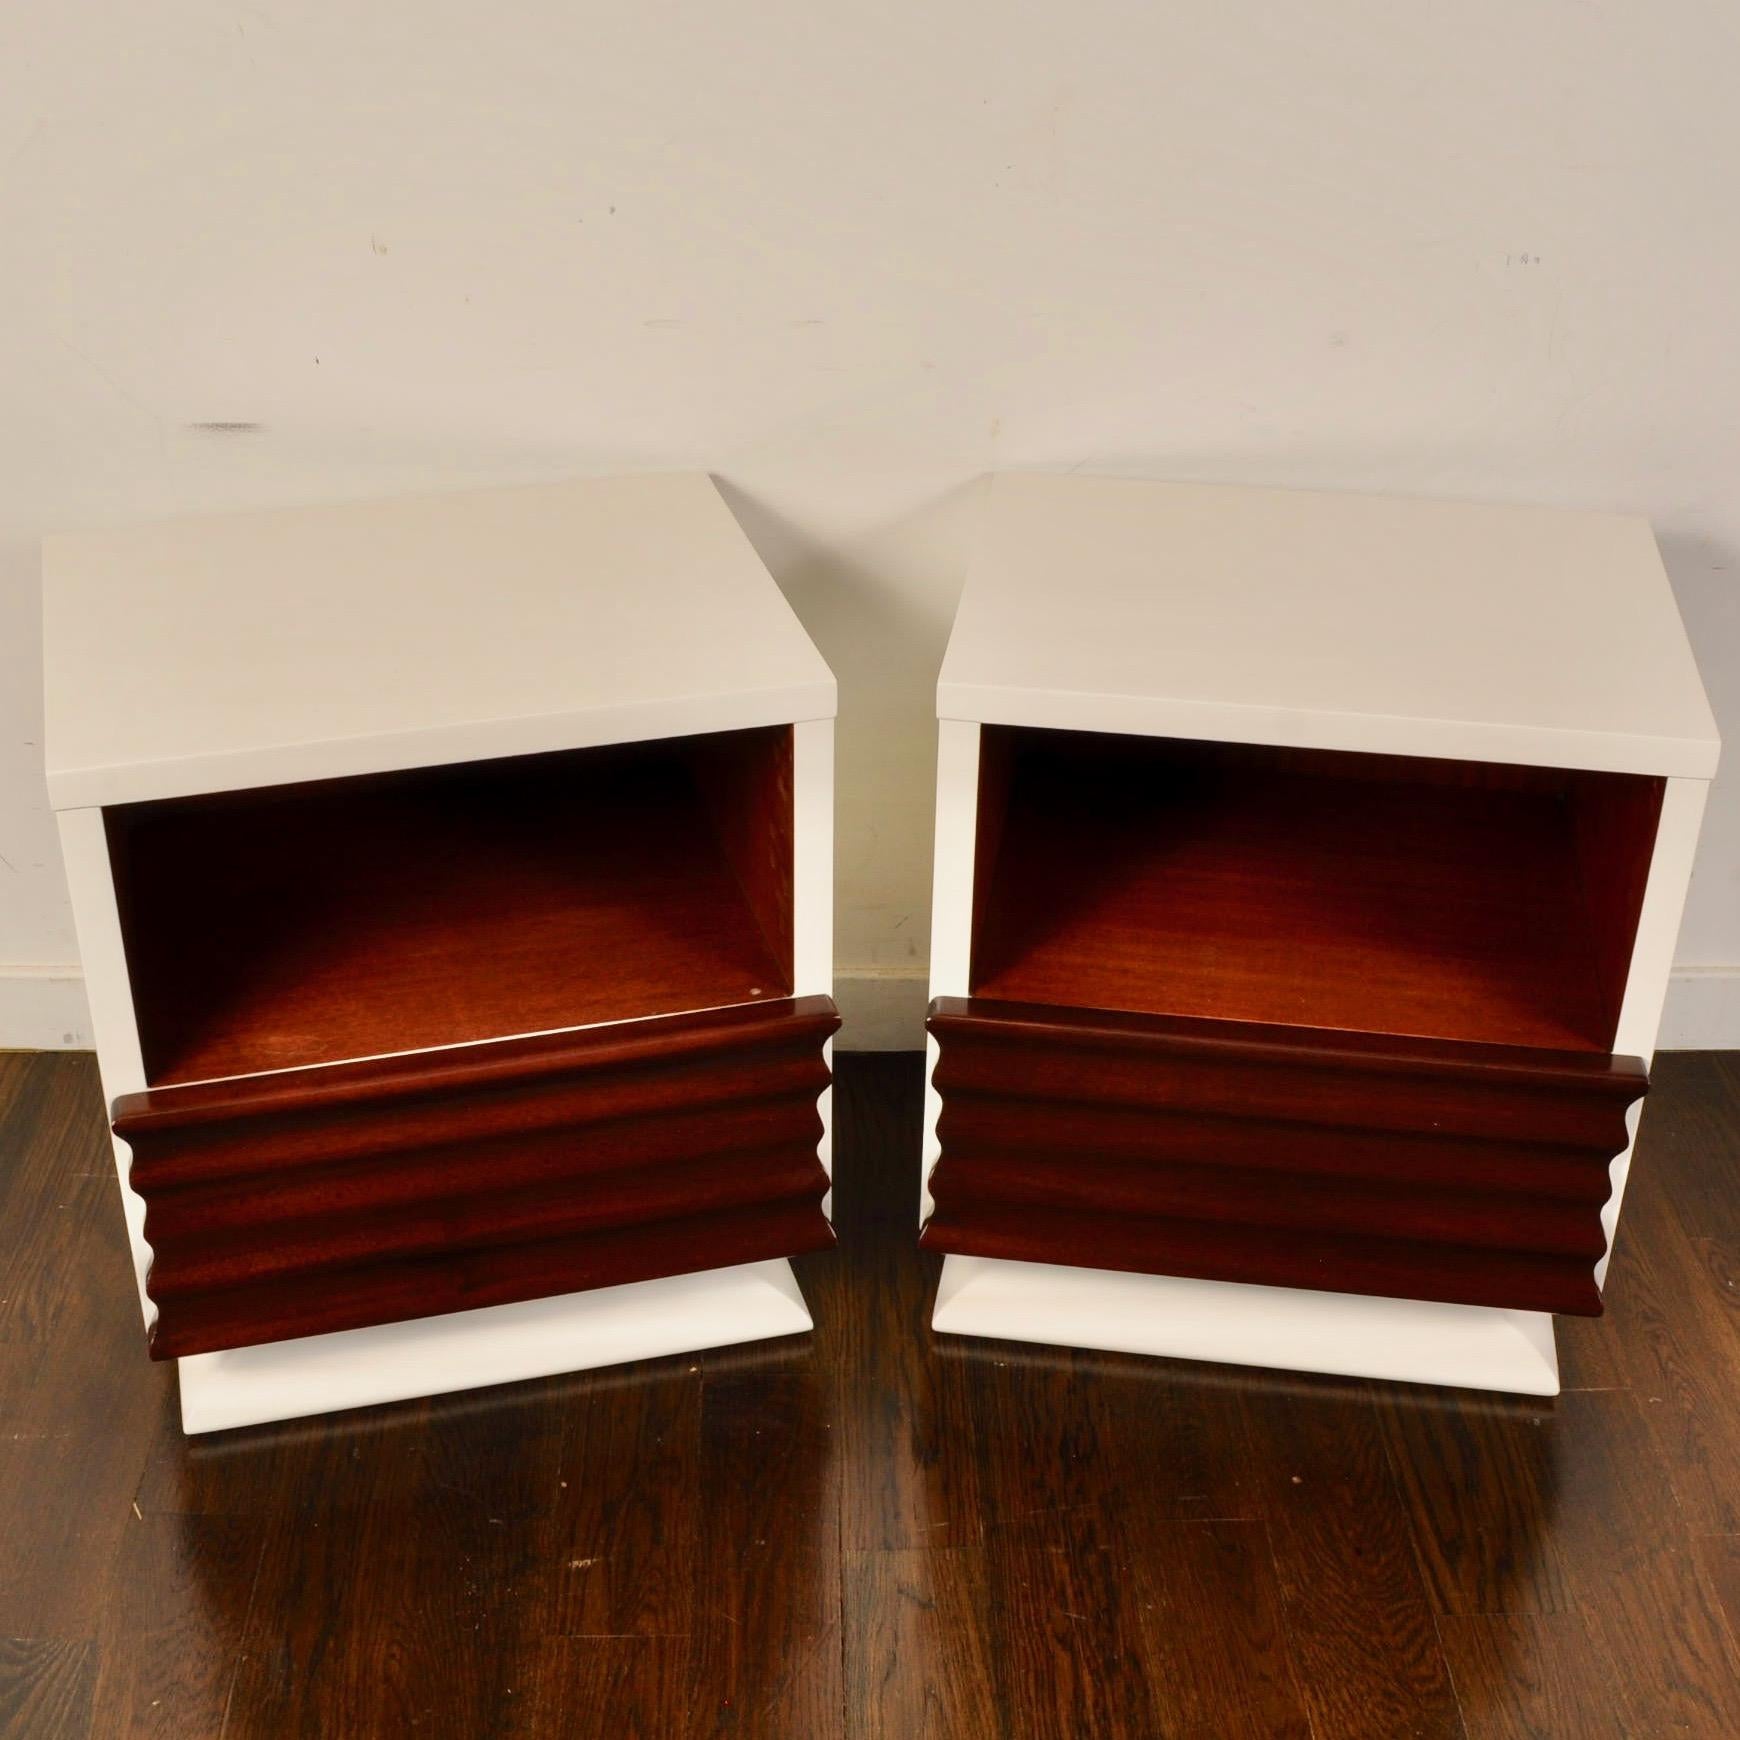 Nice sculptural front mahogany nightstands from the 1950s that have been updated with a white lacquer. Each piece features a deep cubby and a bottom drawer.